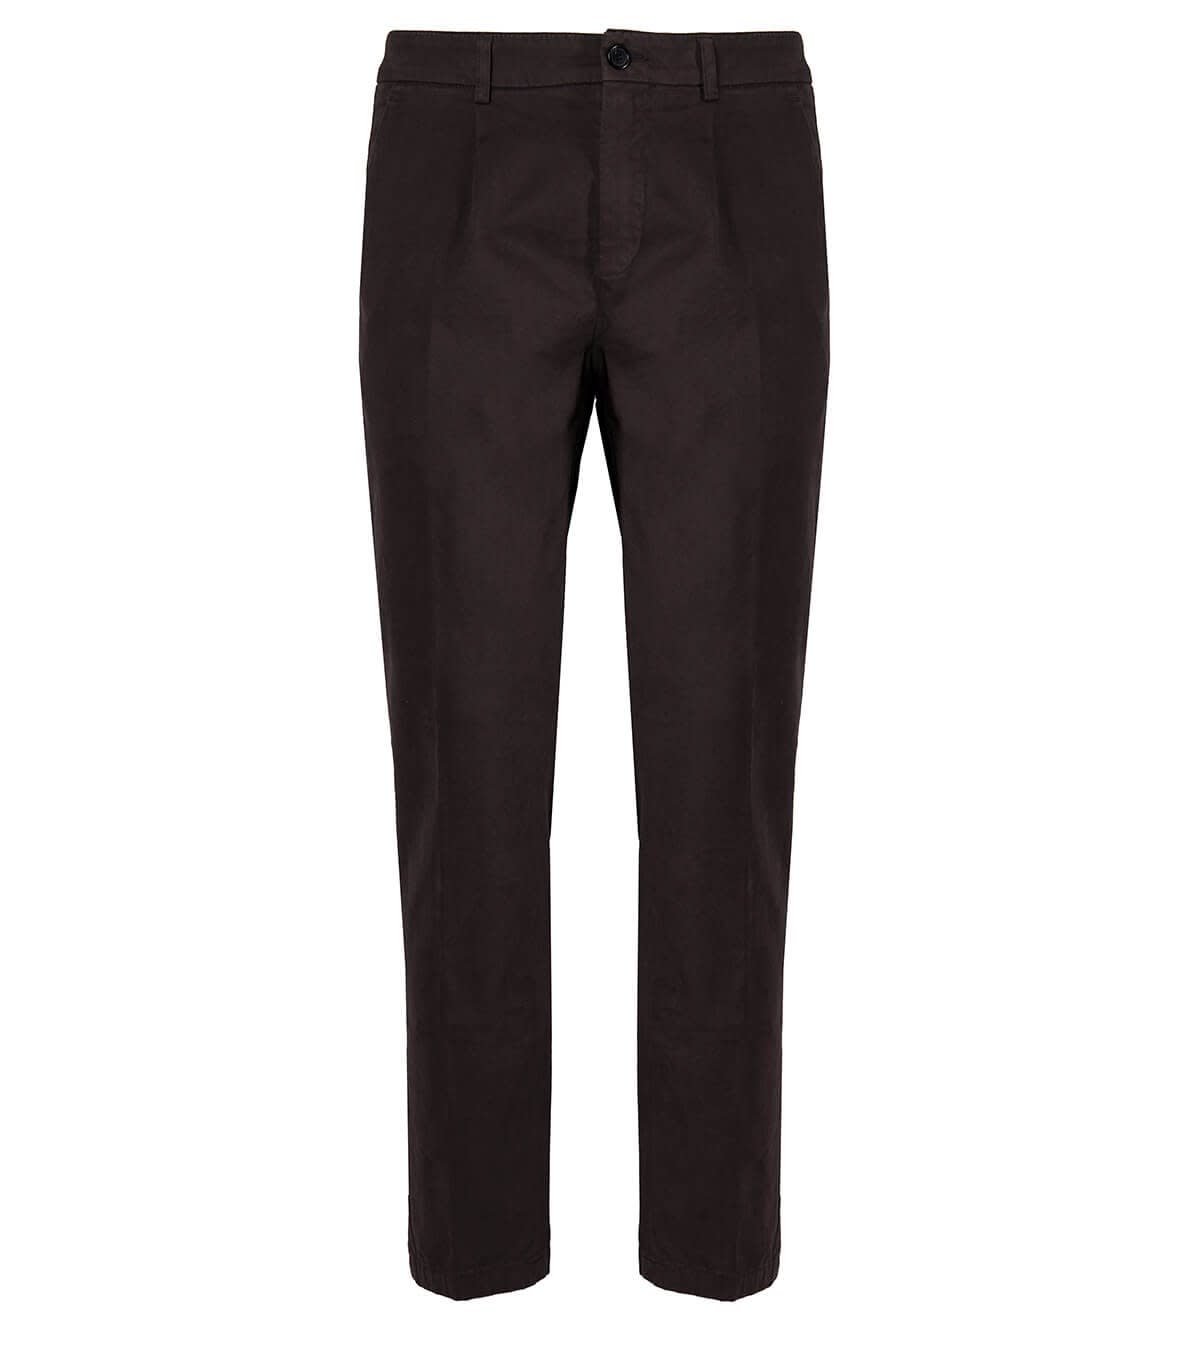 Department Five Department 5 Prince Dark Brown Chino Trousers